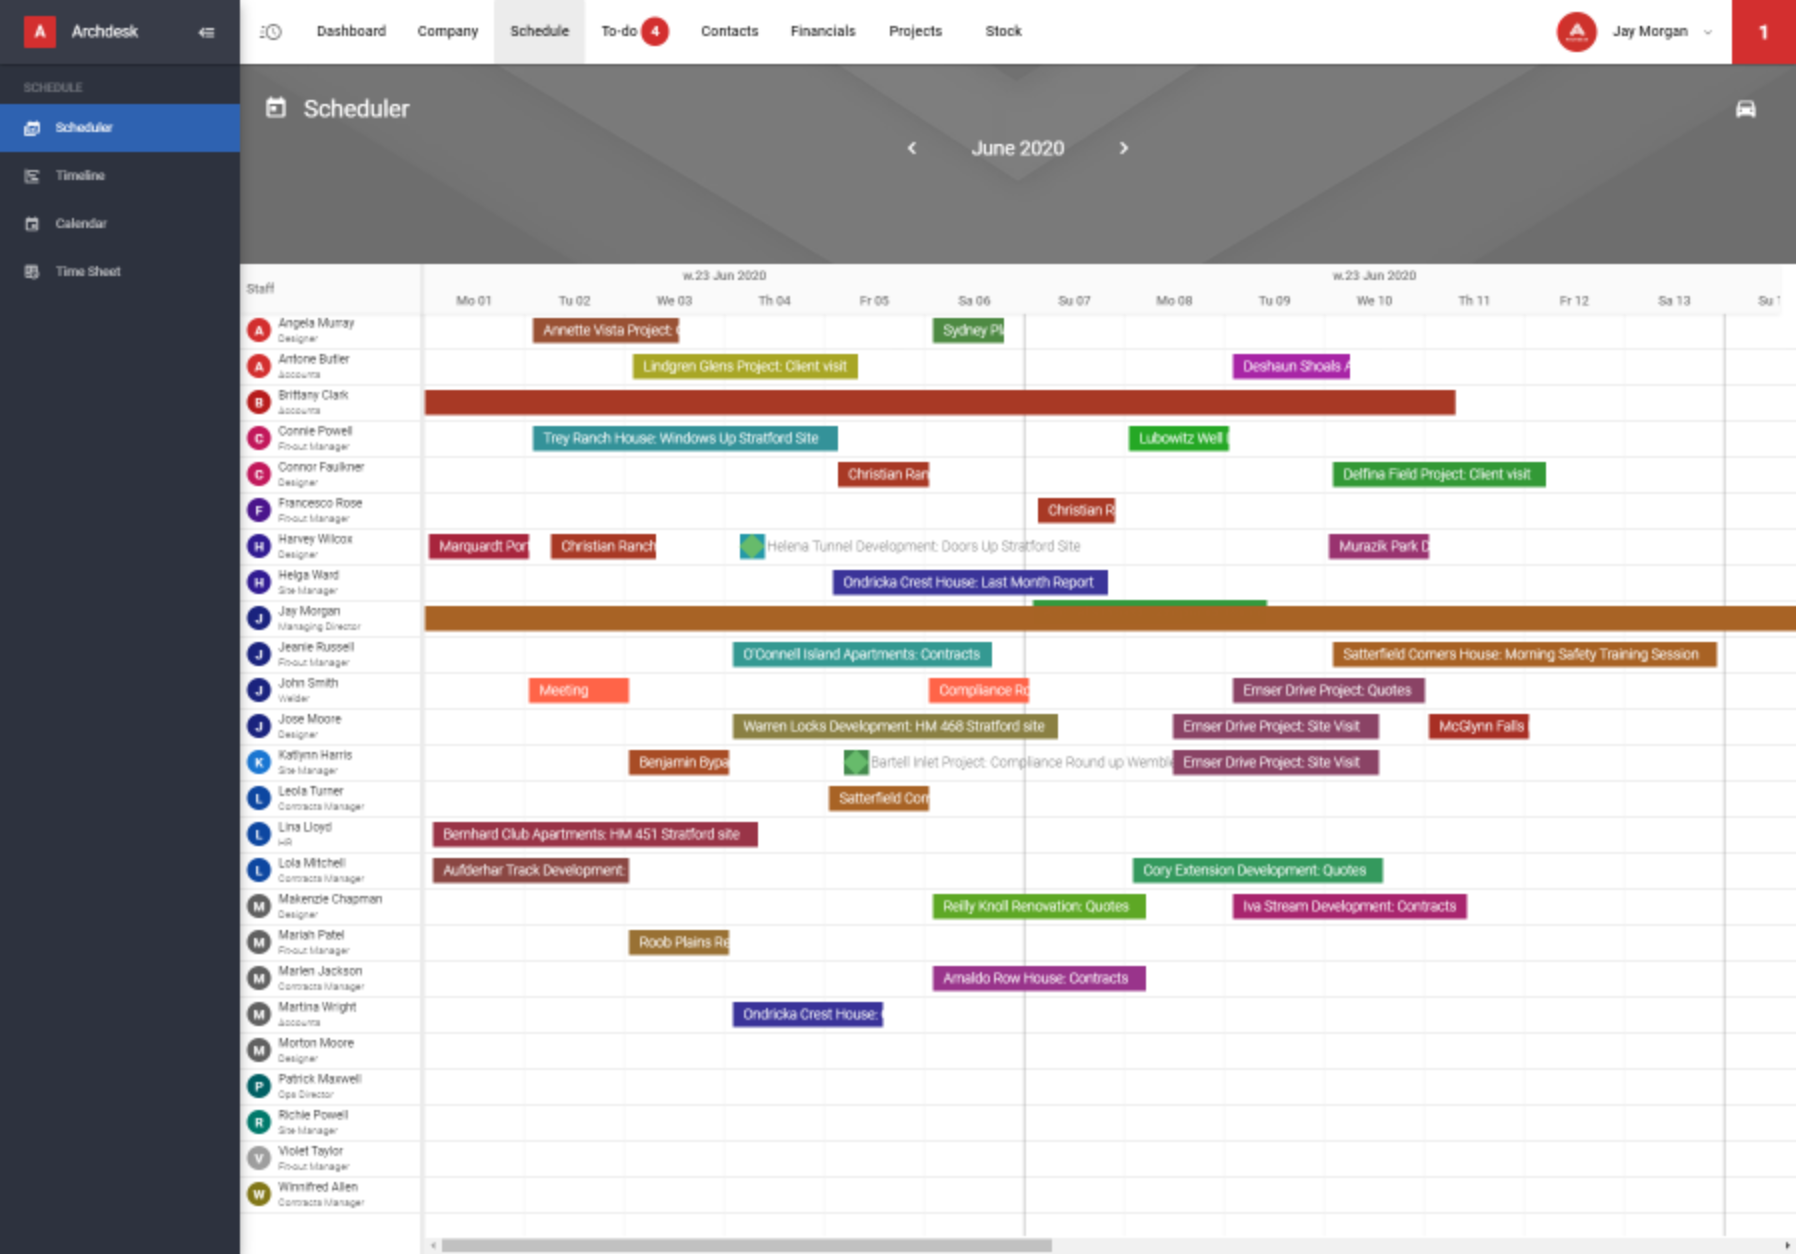 View on the employees' schedules in Archdesk